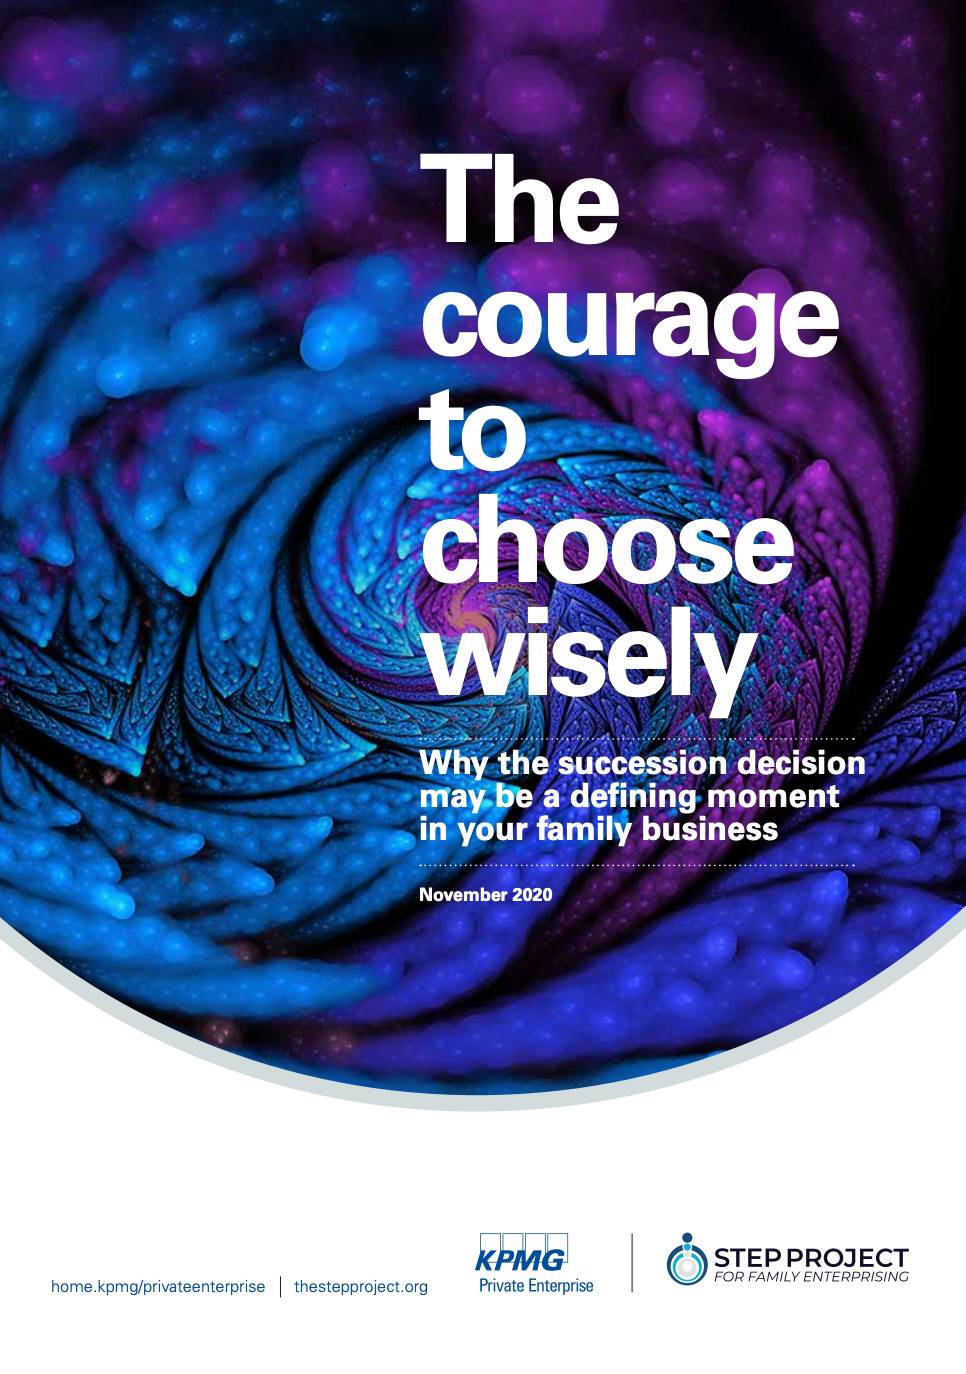 STEP Project "The Courage to Choose Wisely: Why the succession decision may be a defining moment in your family business" Article Cover